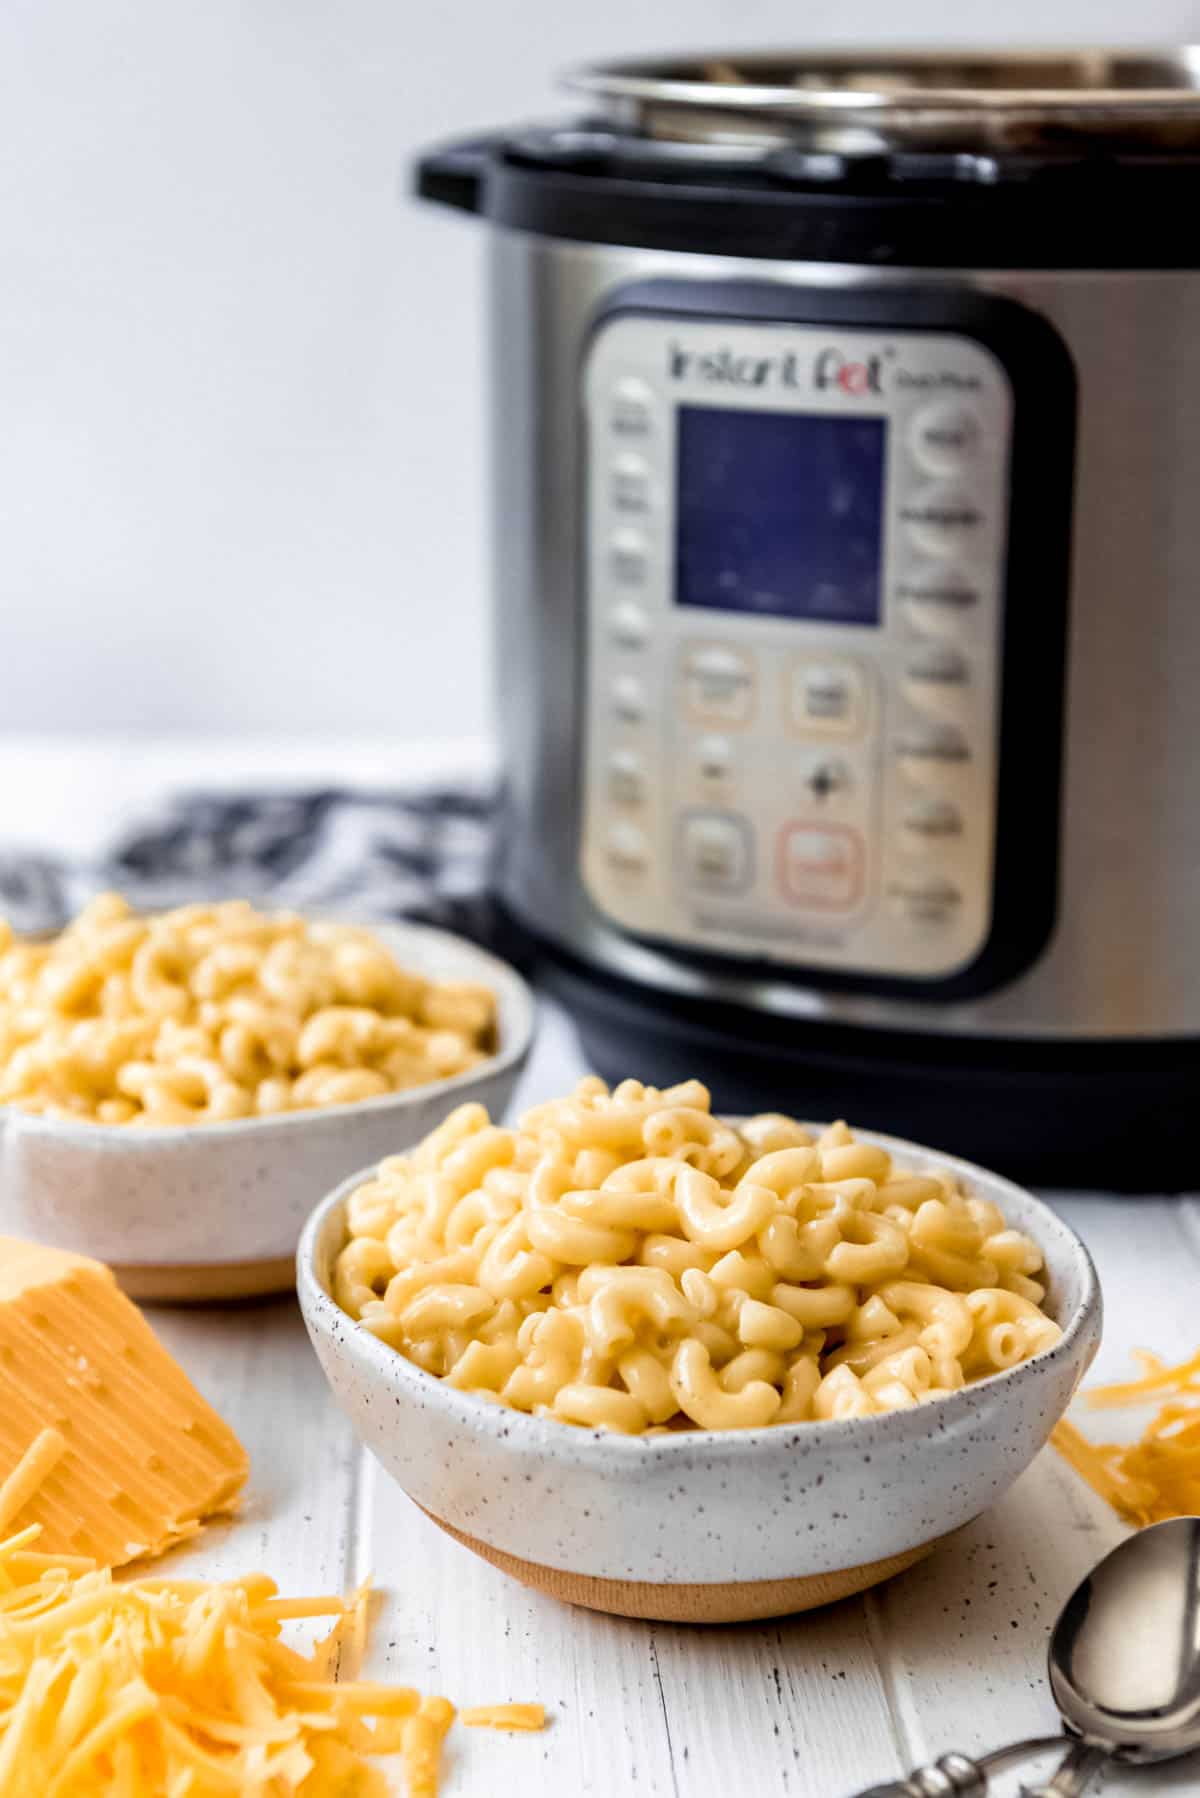 two bowls of homemade macaroni & cheese in front of an Instant Pot pressure cooker.